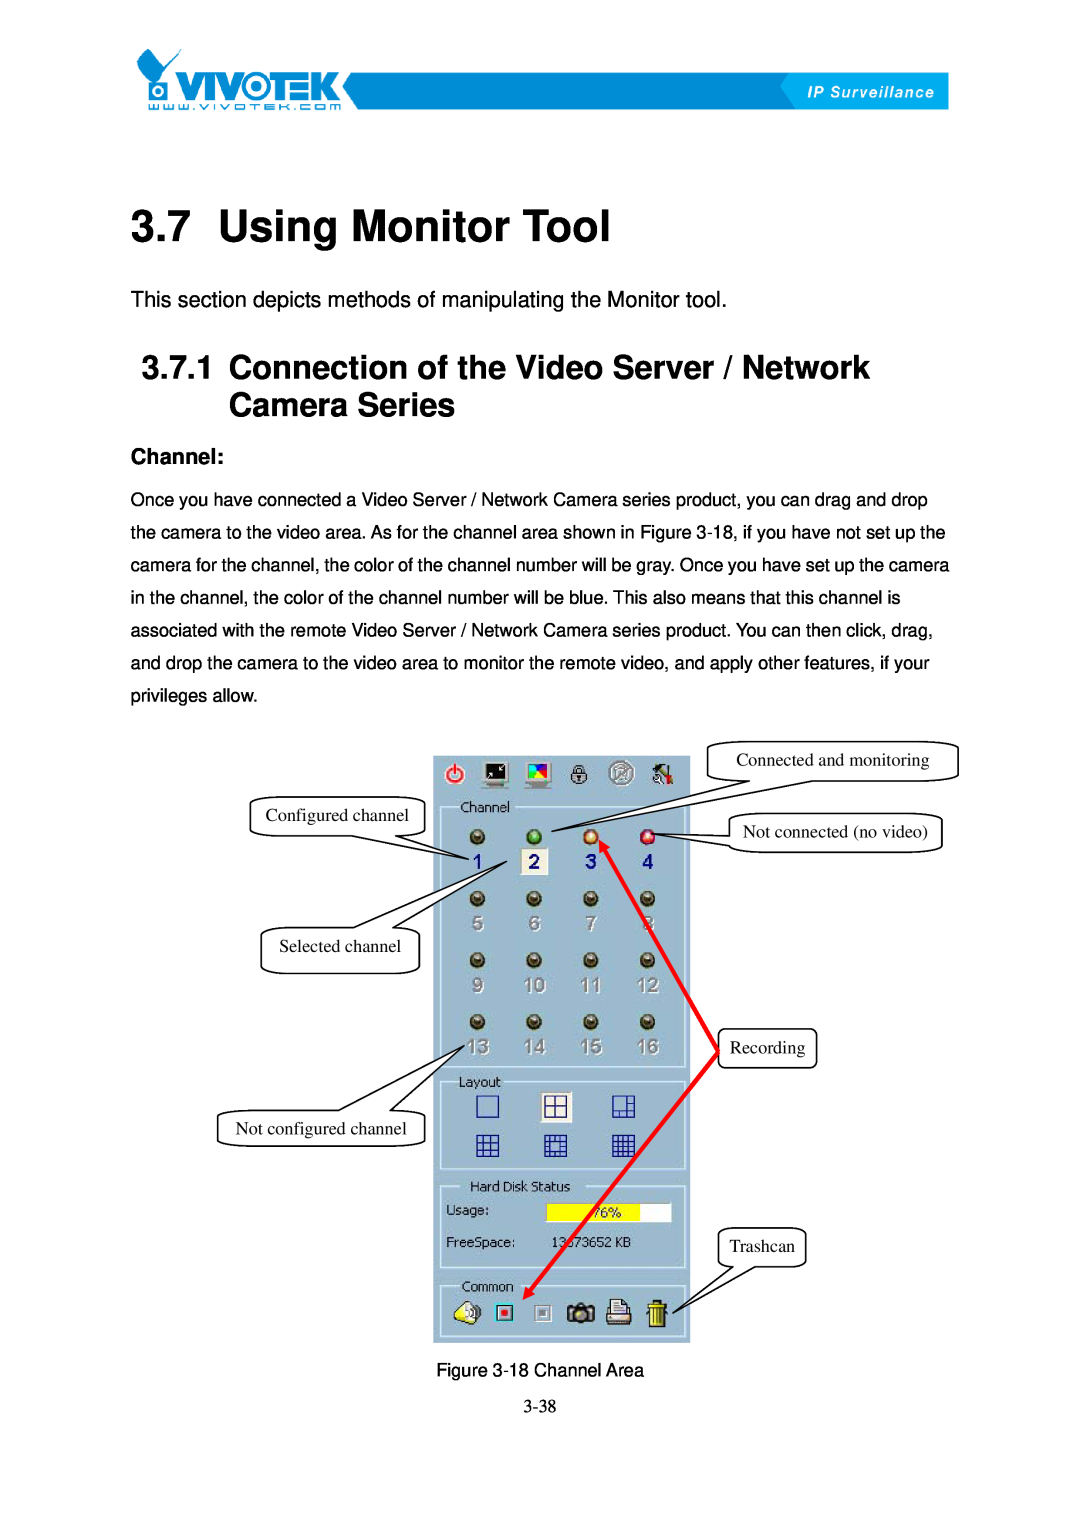 Vivotek ST3402 user manual Using16BMonitor Tool, Connection38Bof the Video Server / Network Camera Series, Channel 